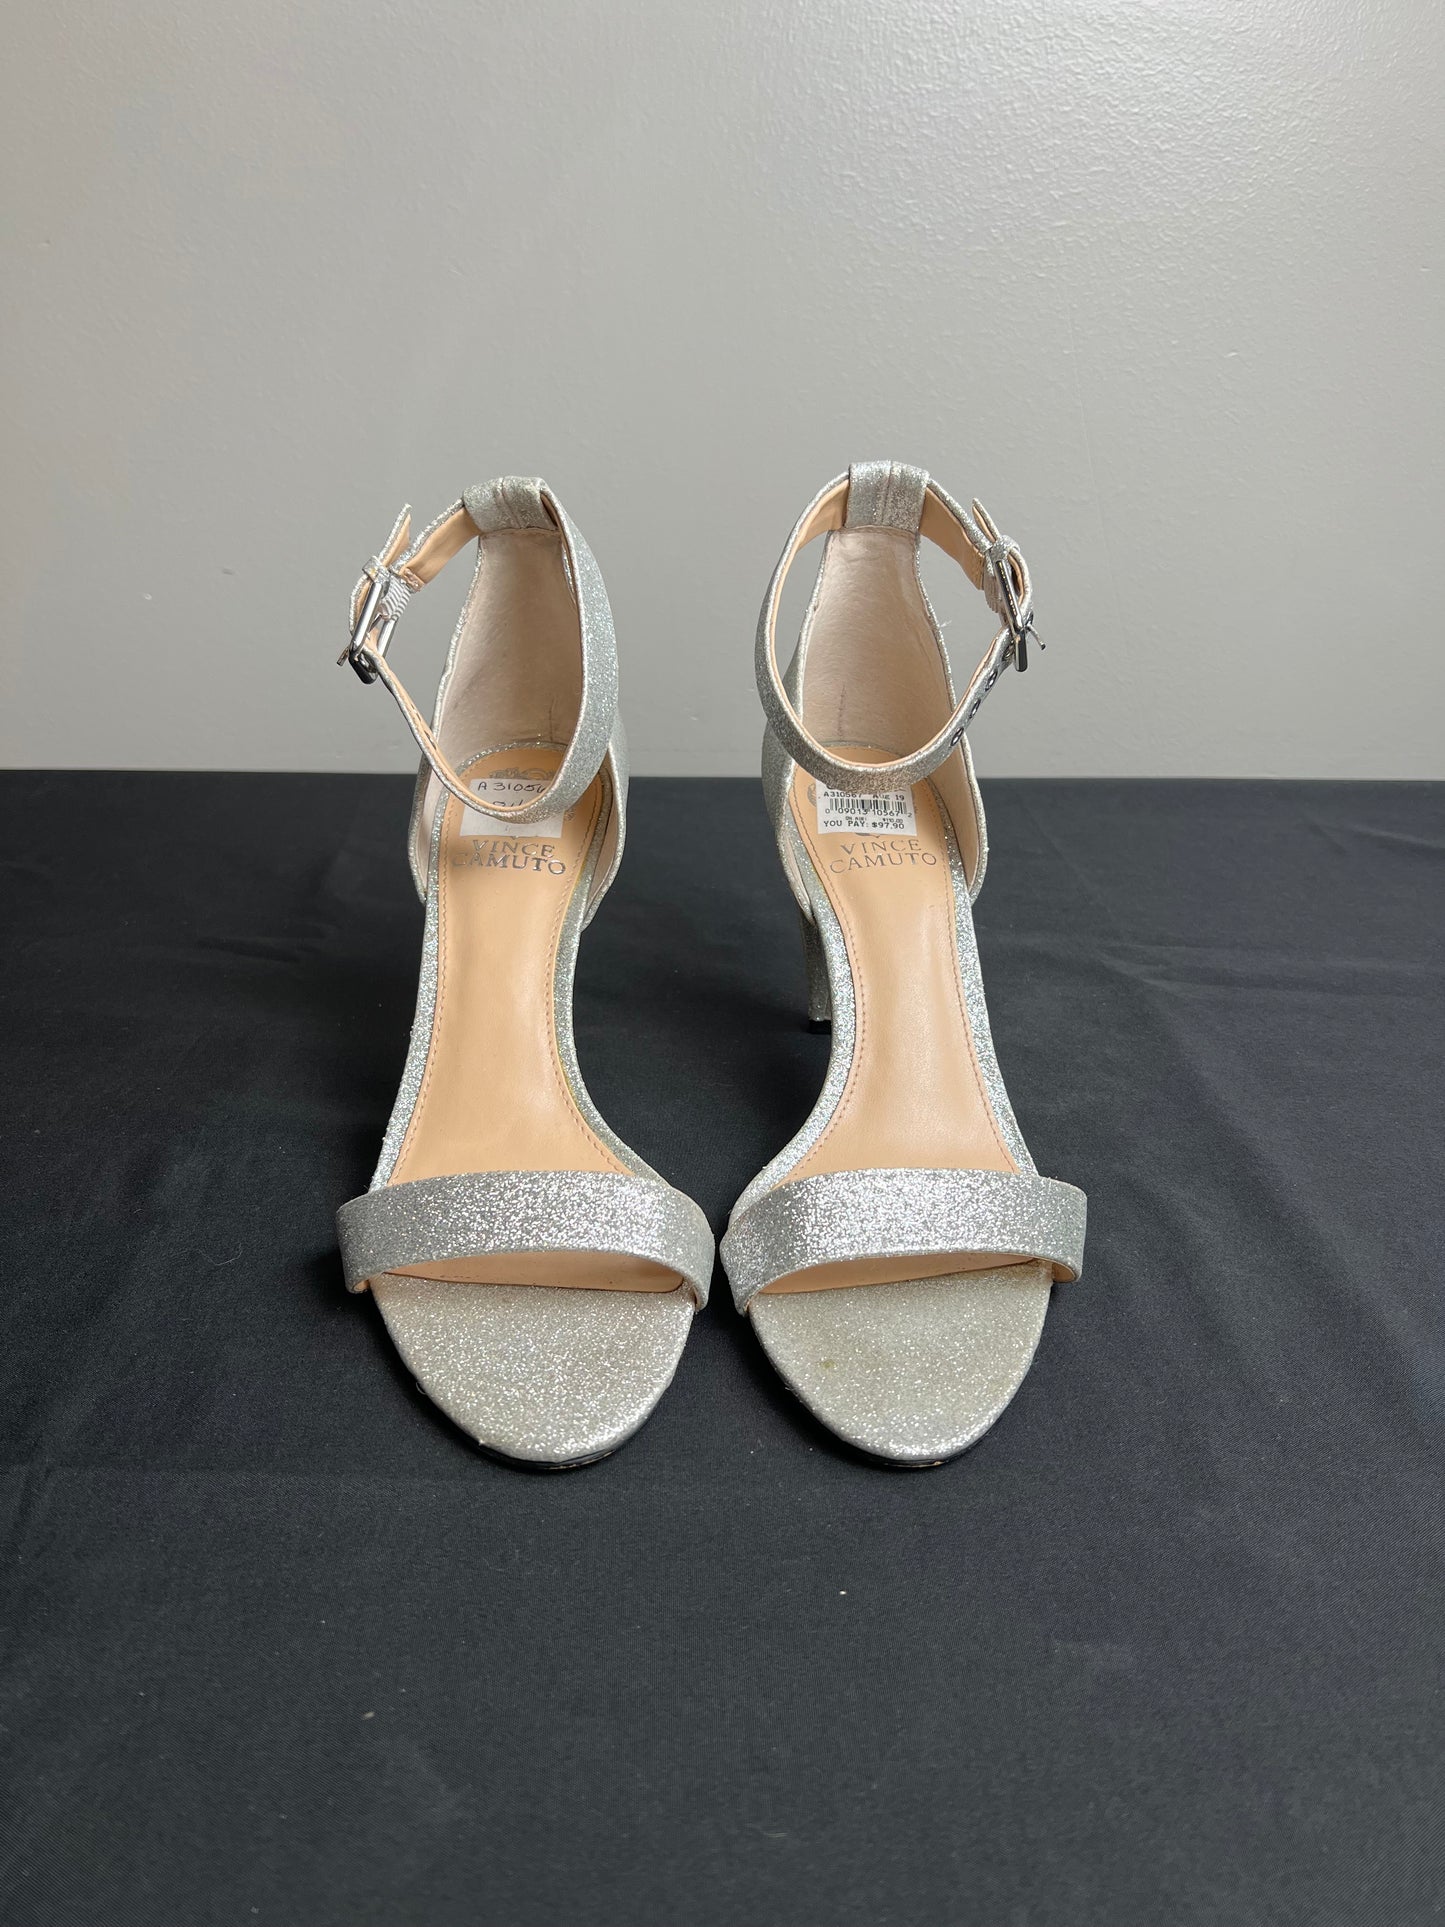 Sandals Heels Block By Vince Camuto  Size: 8.5